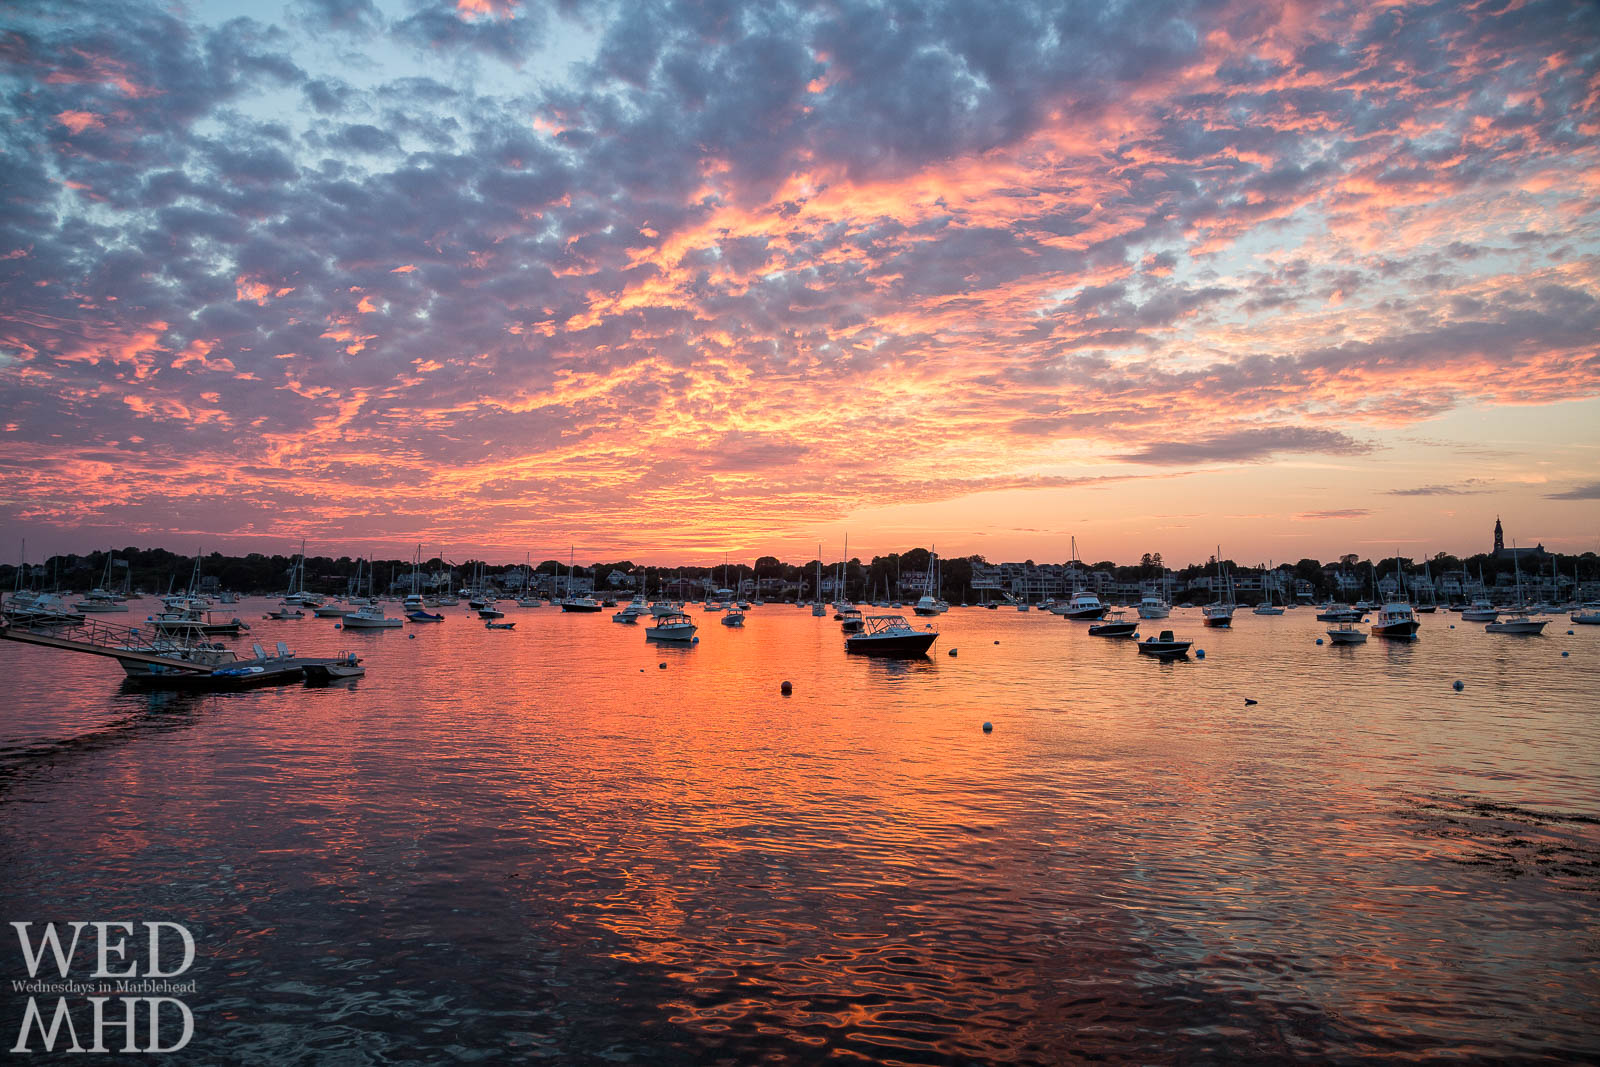 It won't be long before boats fill their moorings and we can once again enjoy warm Summer sunsets on the Harbor